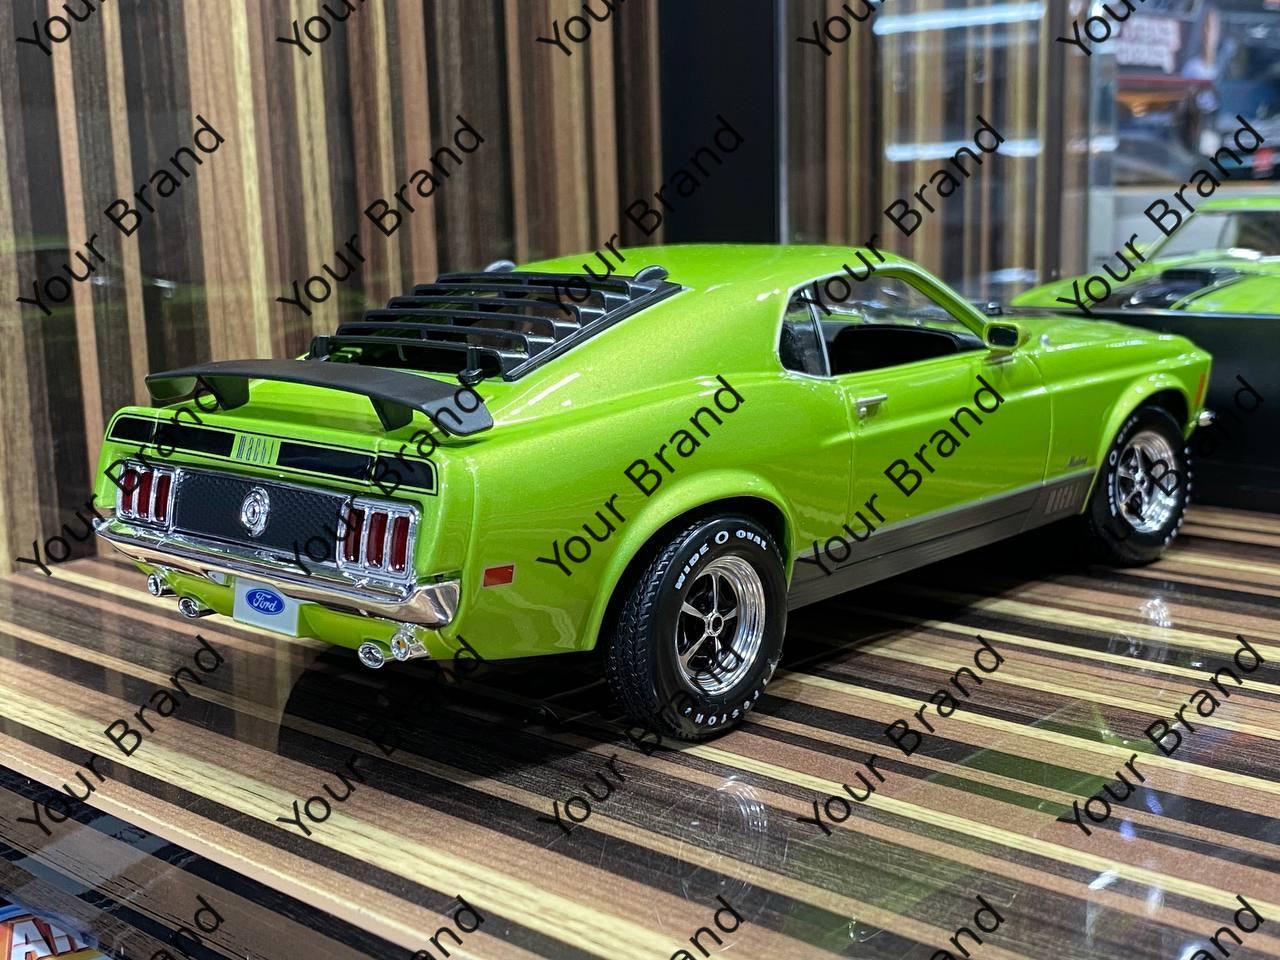 1/18 Diecast Ford Mustang Mach 1 Scale Model Car by Maisto - Diecast model car by dturman.com - Maisto